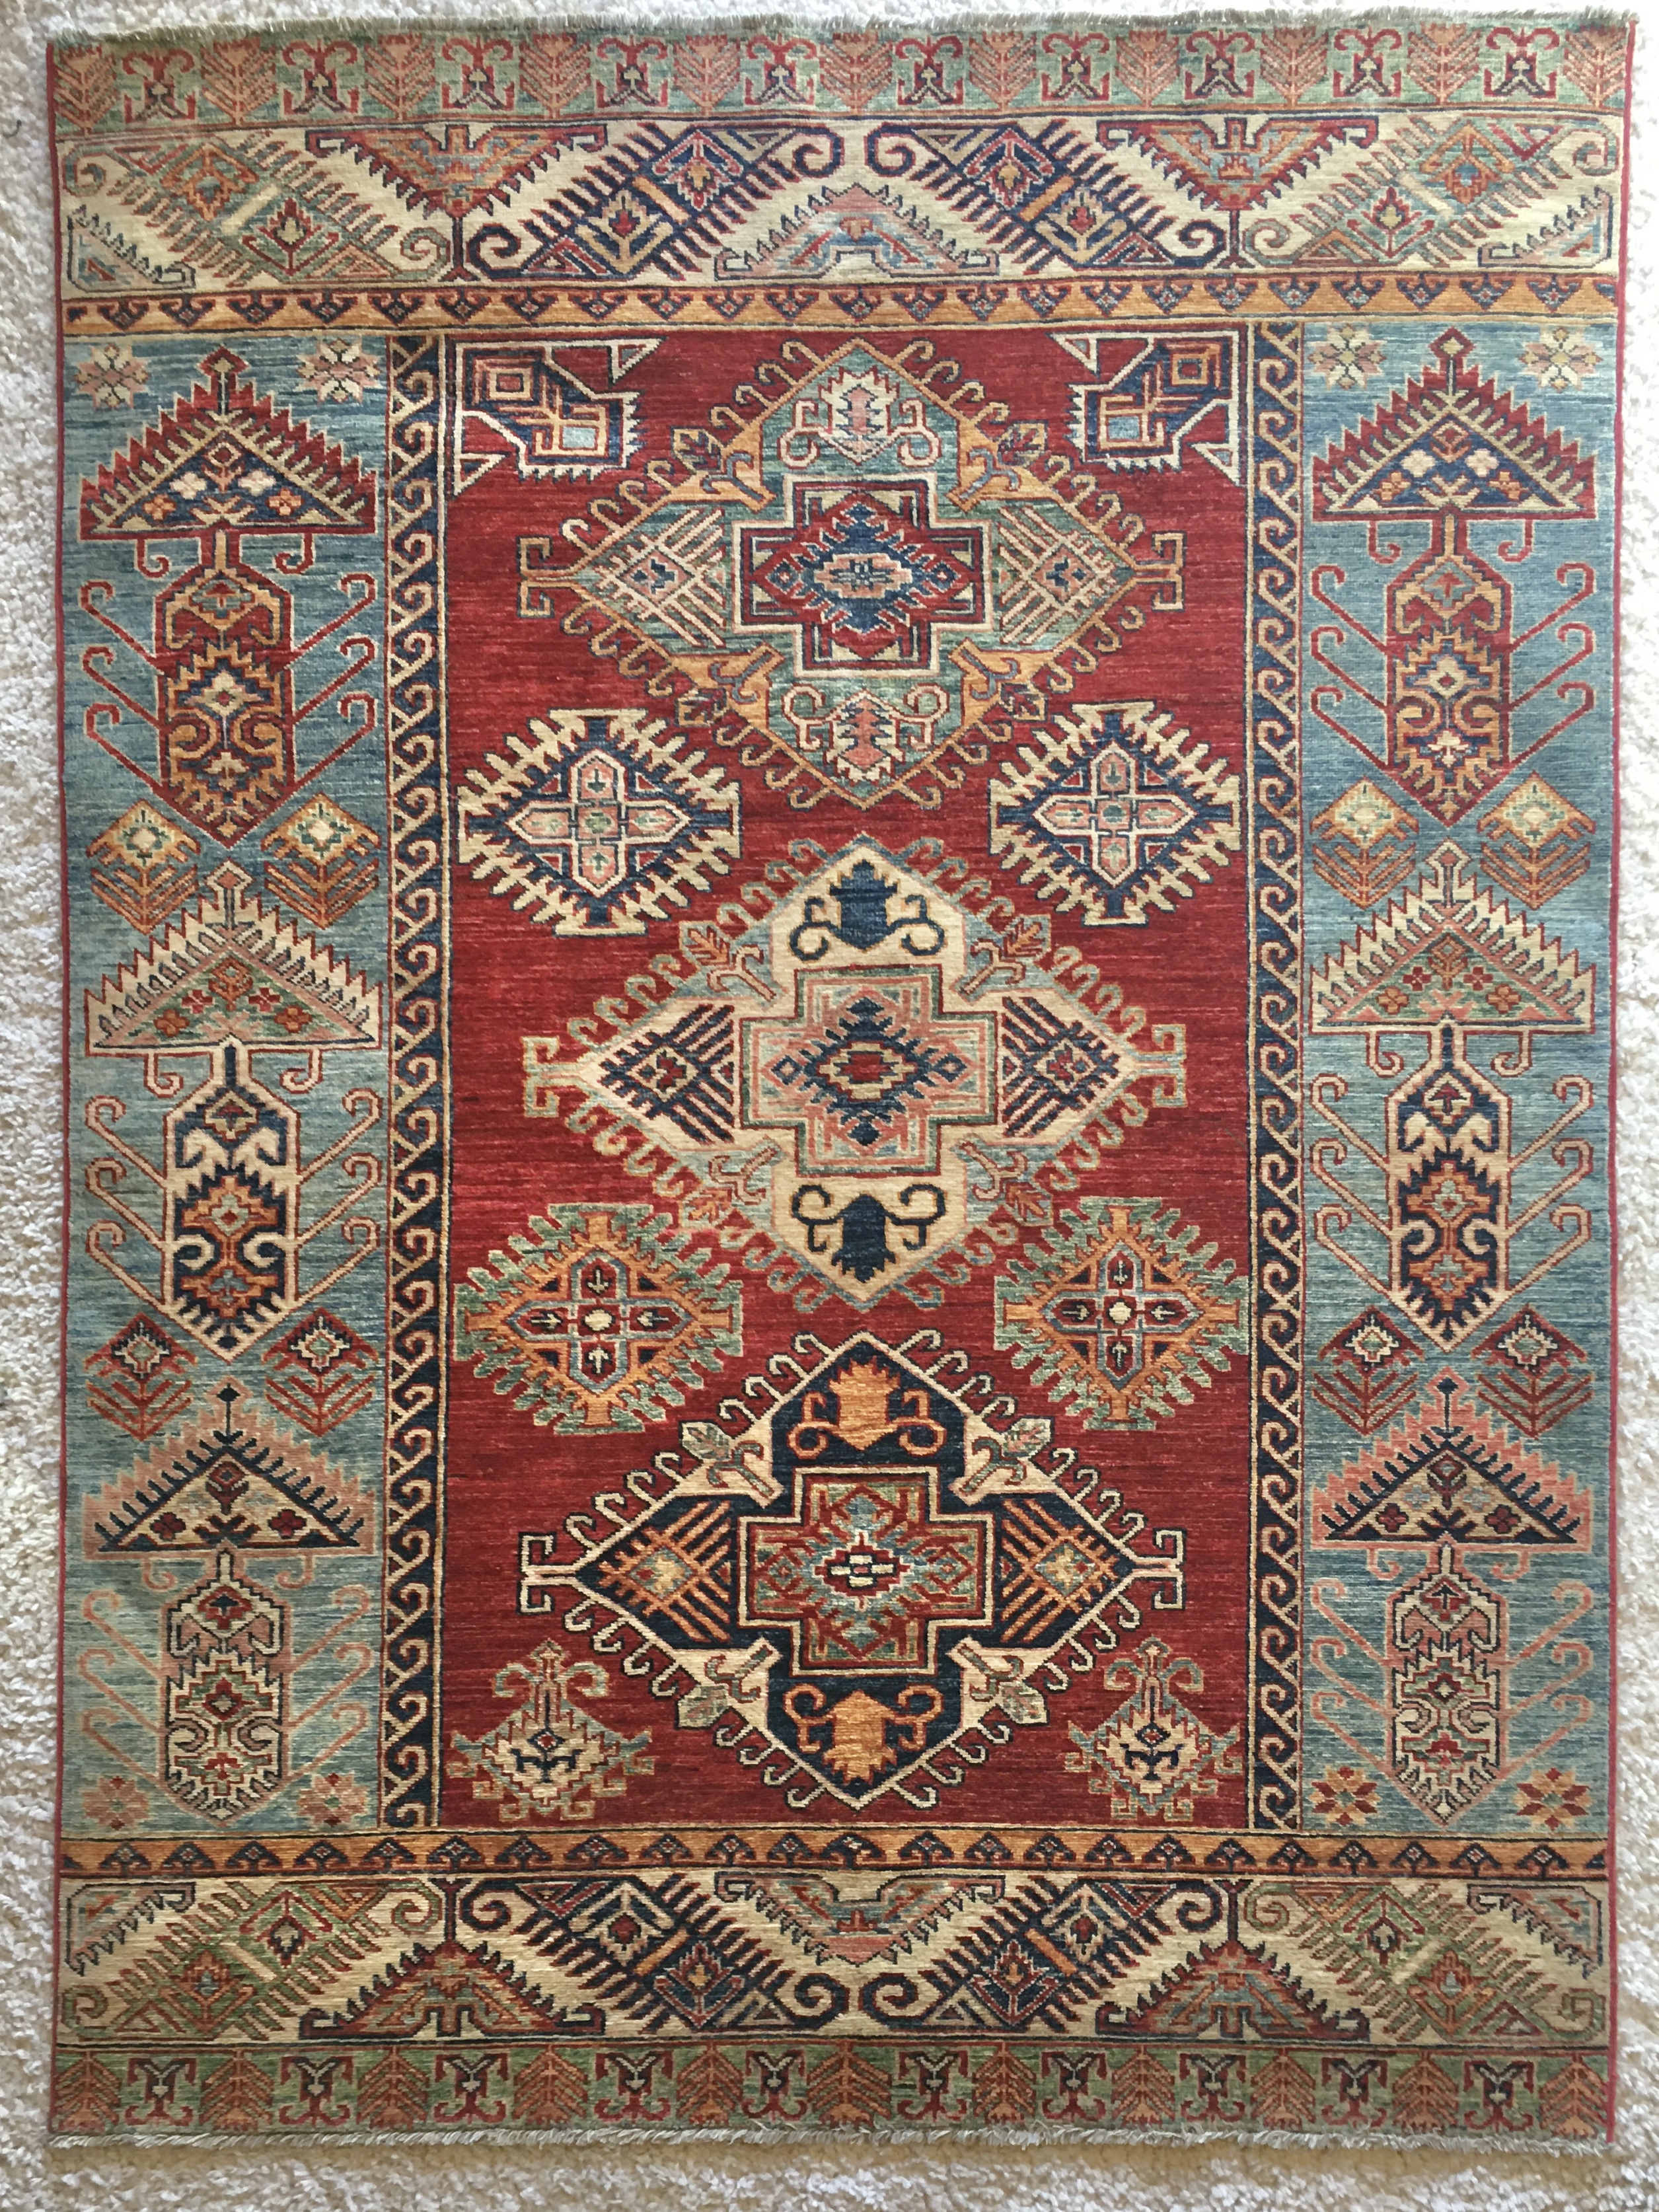 An intricate geometric rug in a range of bright colors